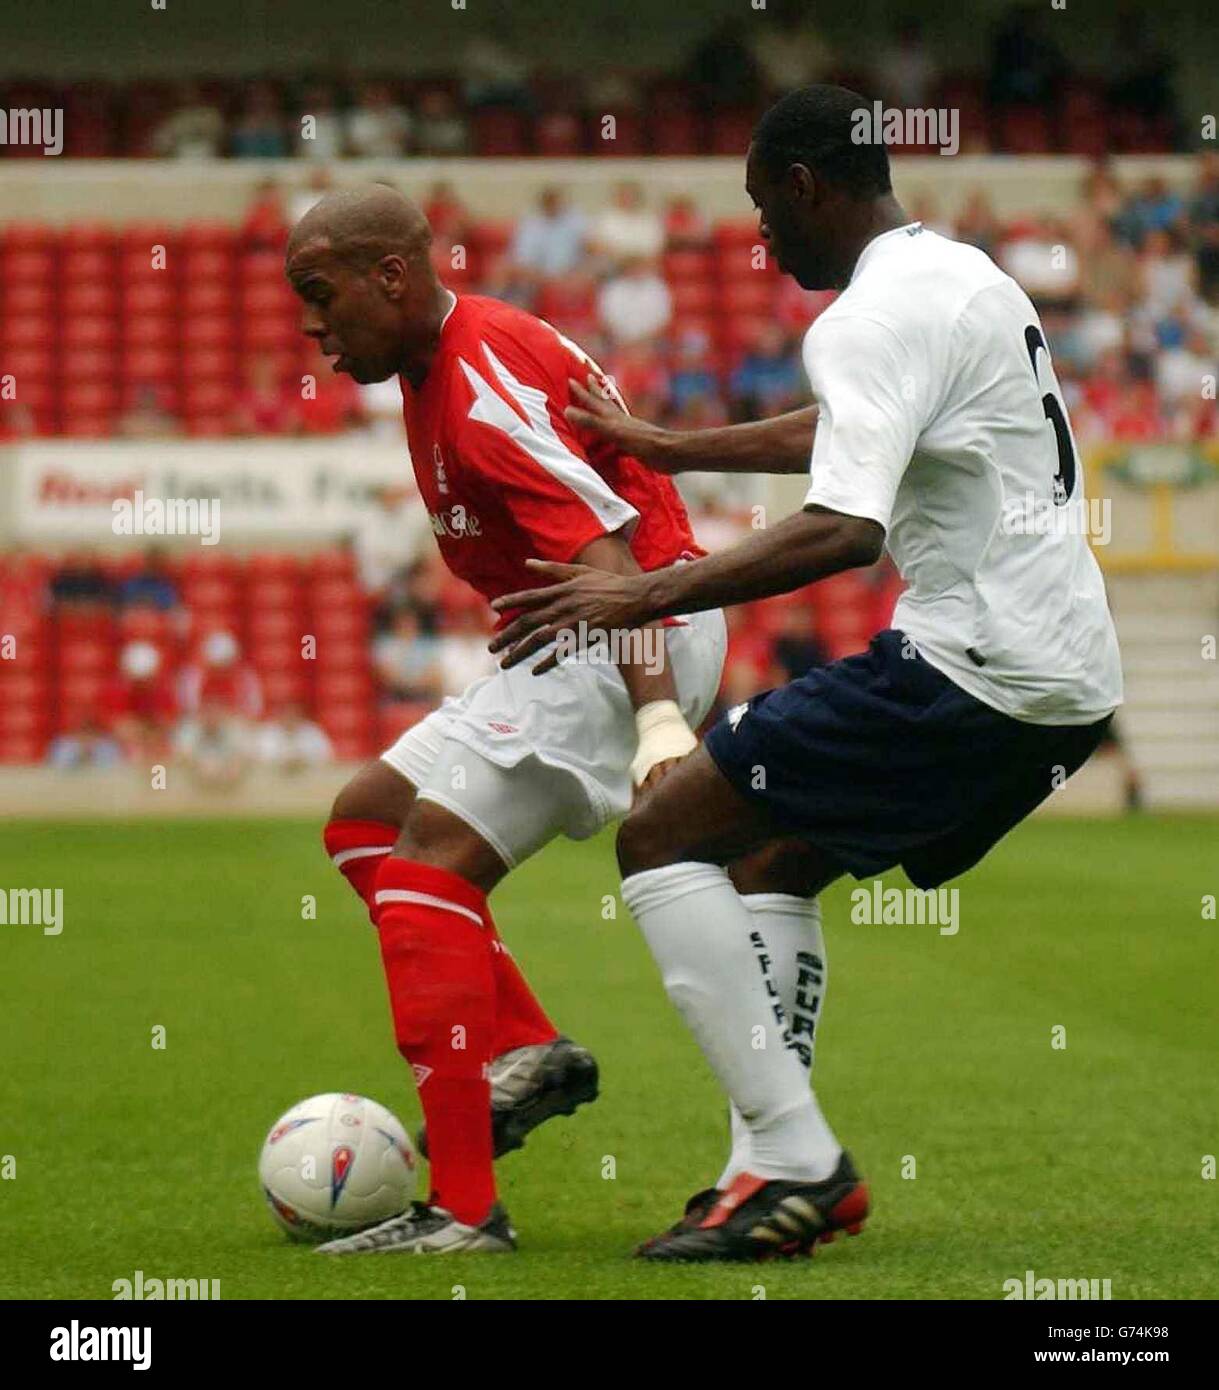 Nottingham Forest's Marlon King (left) holds off Tottenham Hotspur defender Ledley King. during their pre-season friendly match at the City Ground, Nottingham, Saturday July 31, 2004. Stock Photo